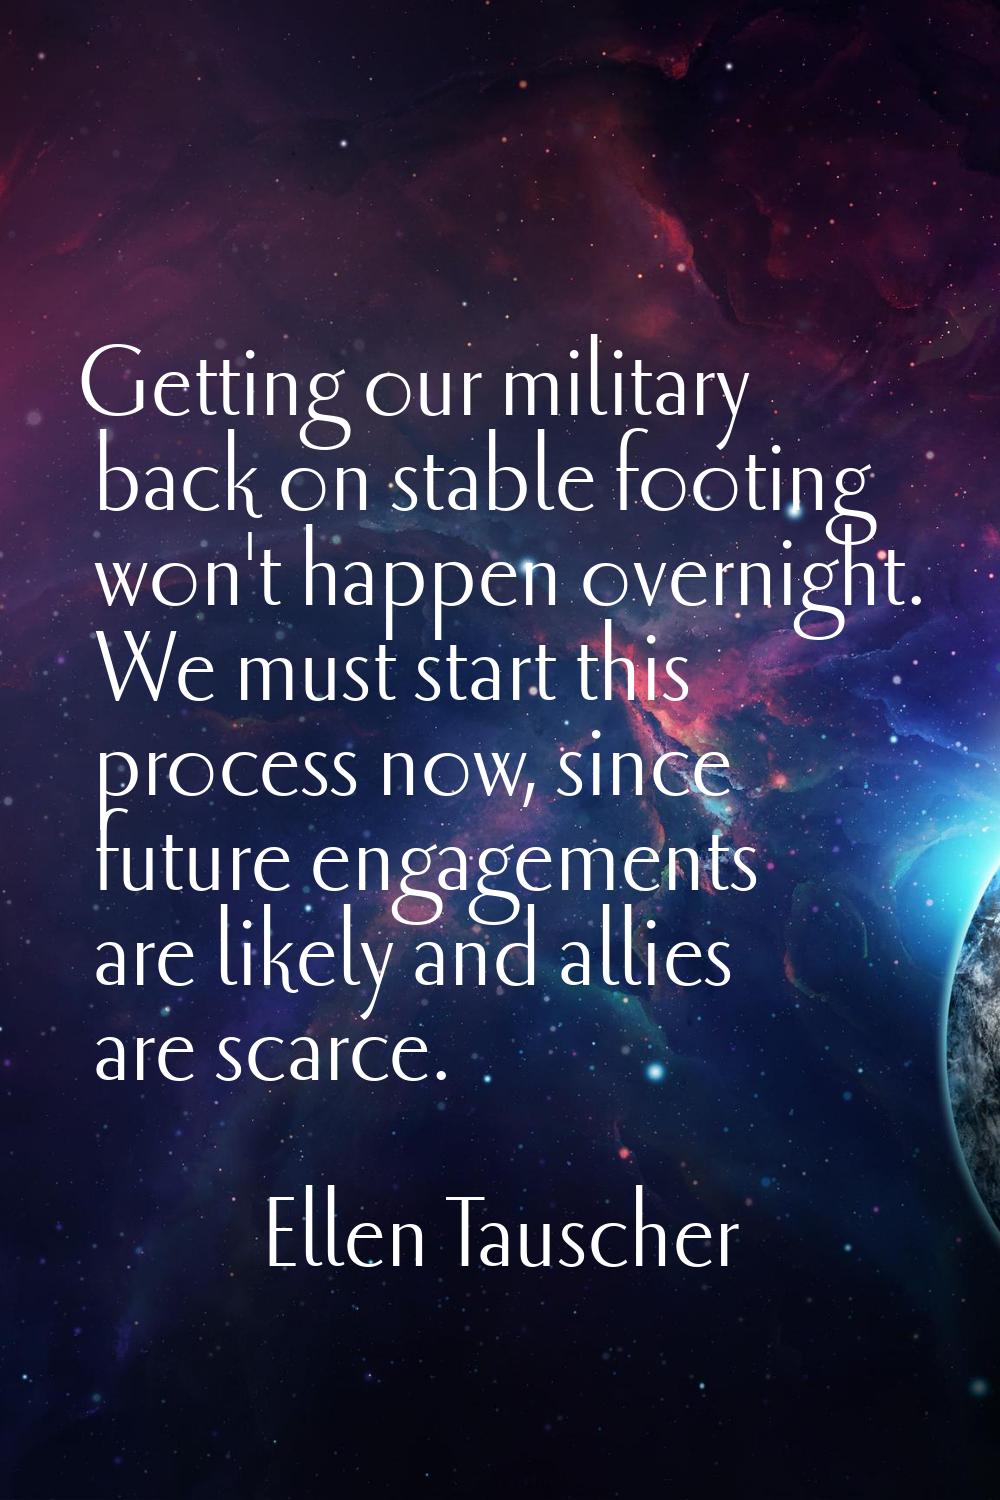 Getting our military back on stable footing won't happen overnight. We must start this process now,